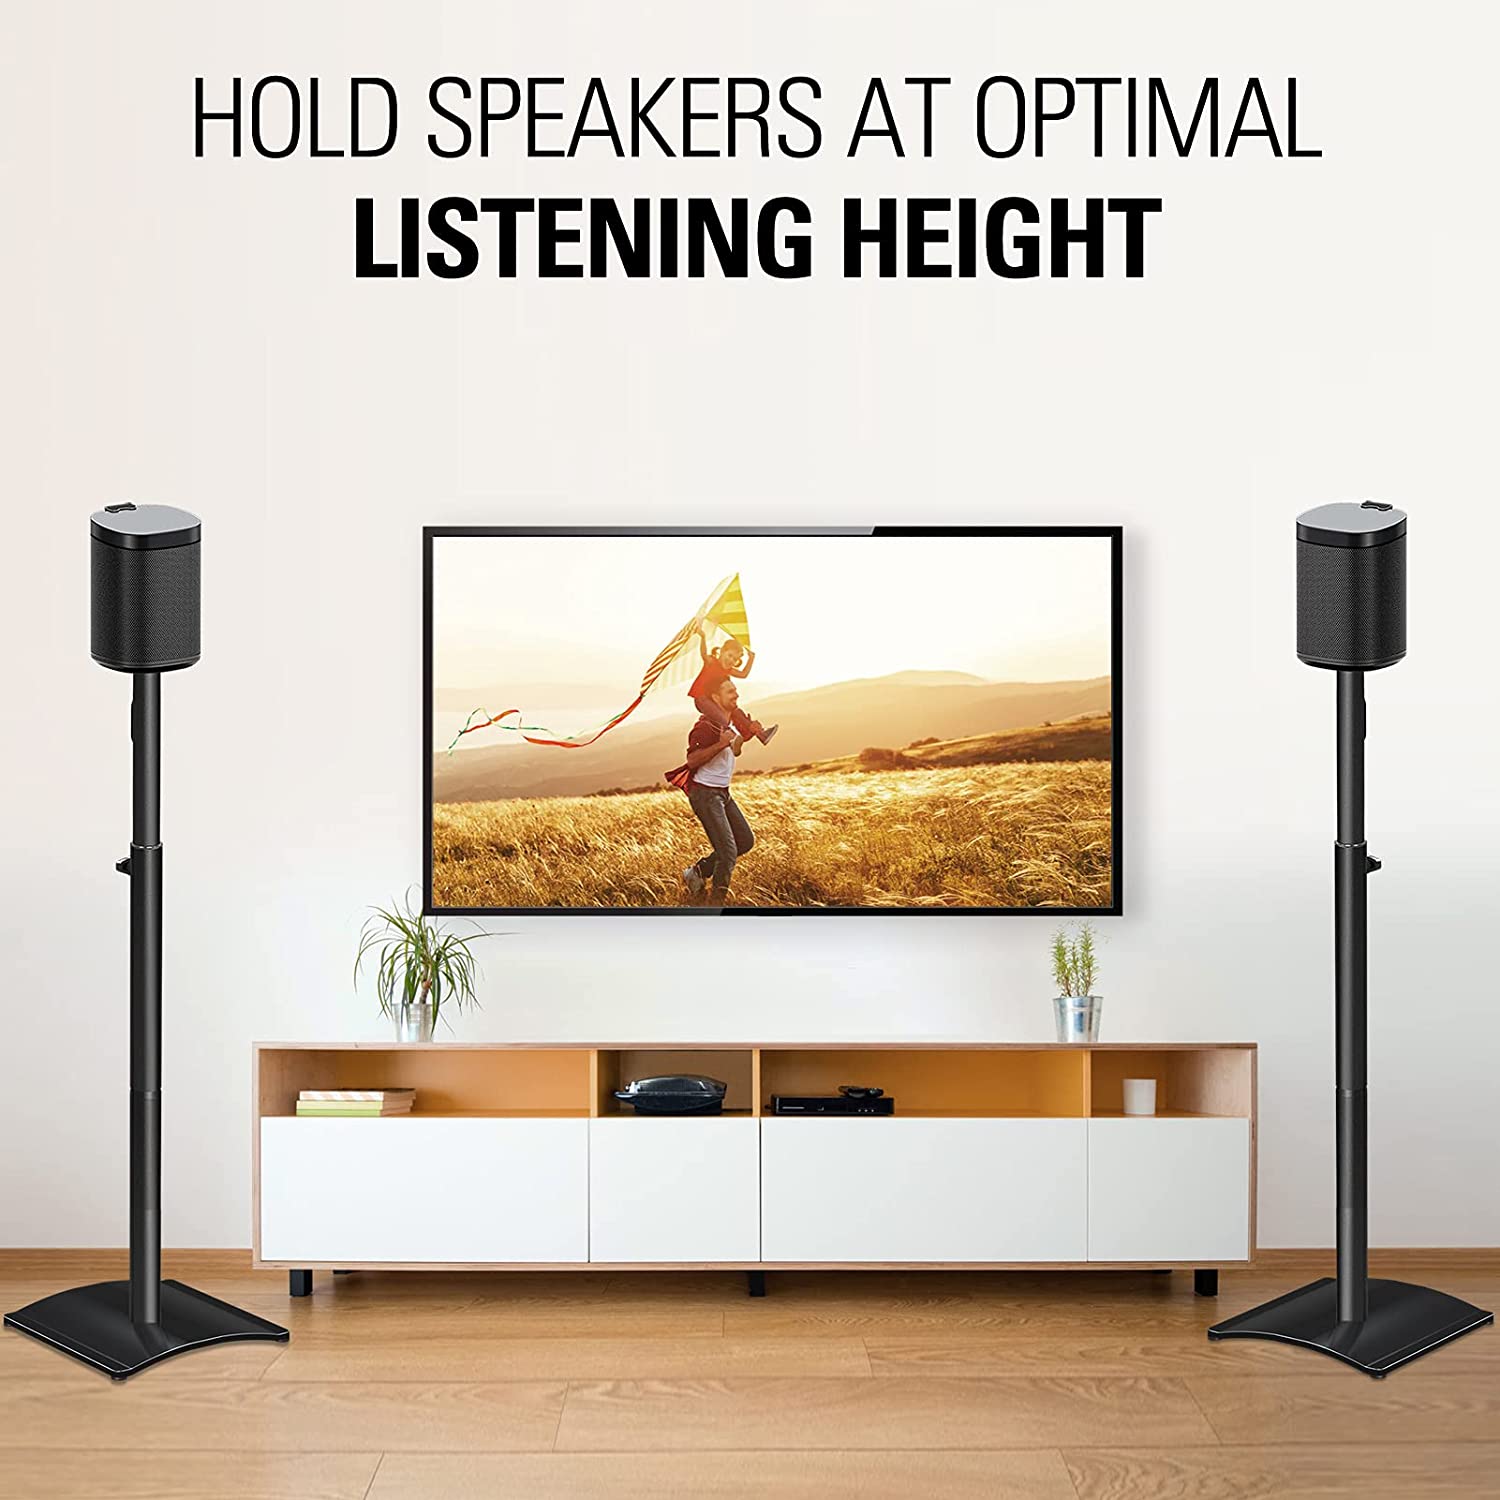 2 hold your speakers at an optimal listening height